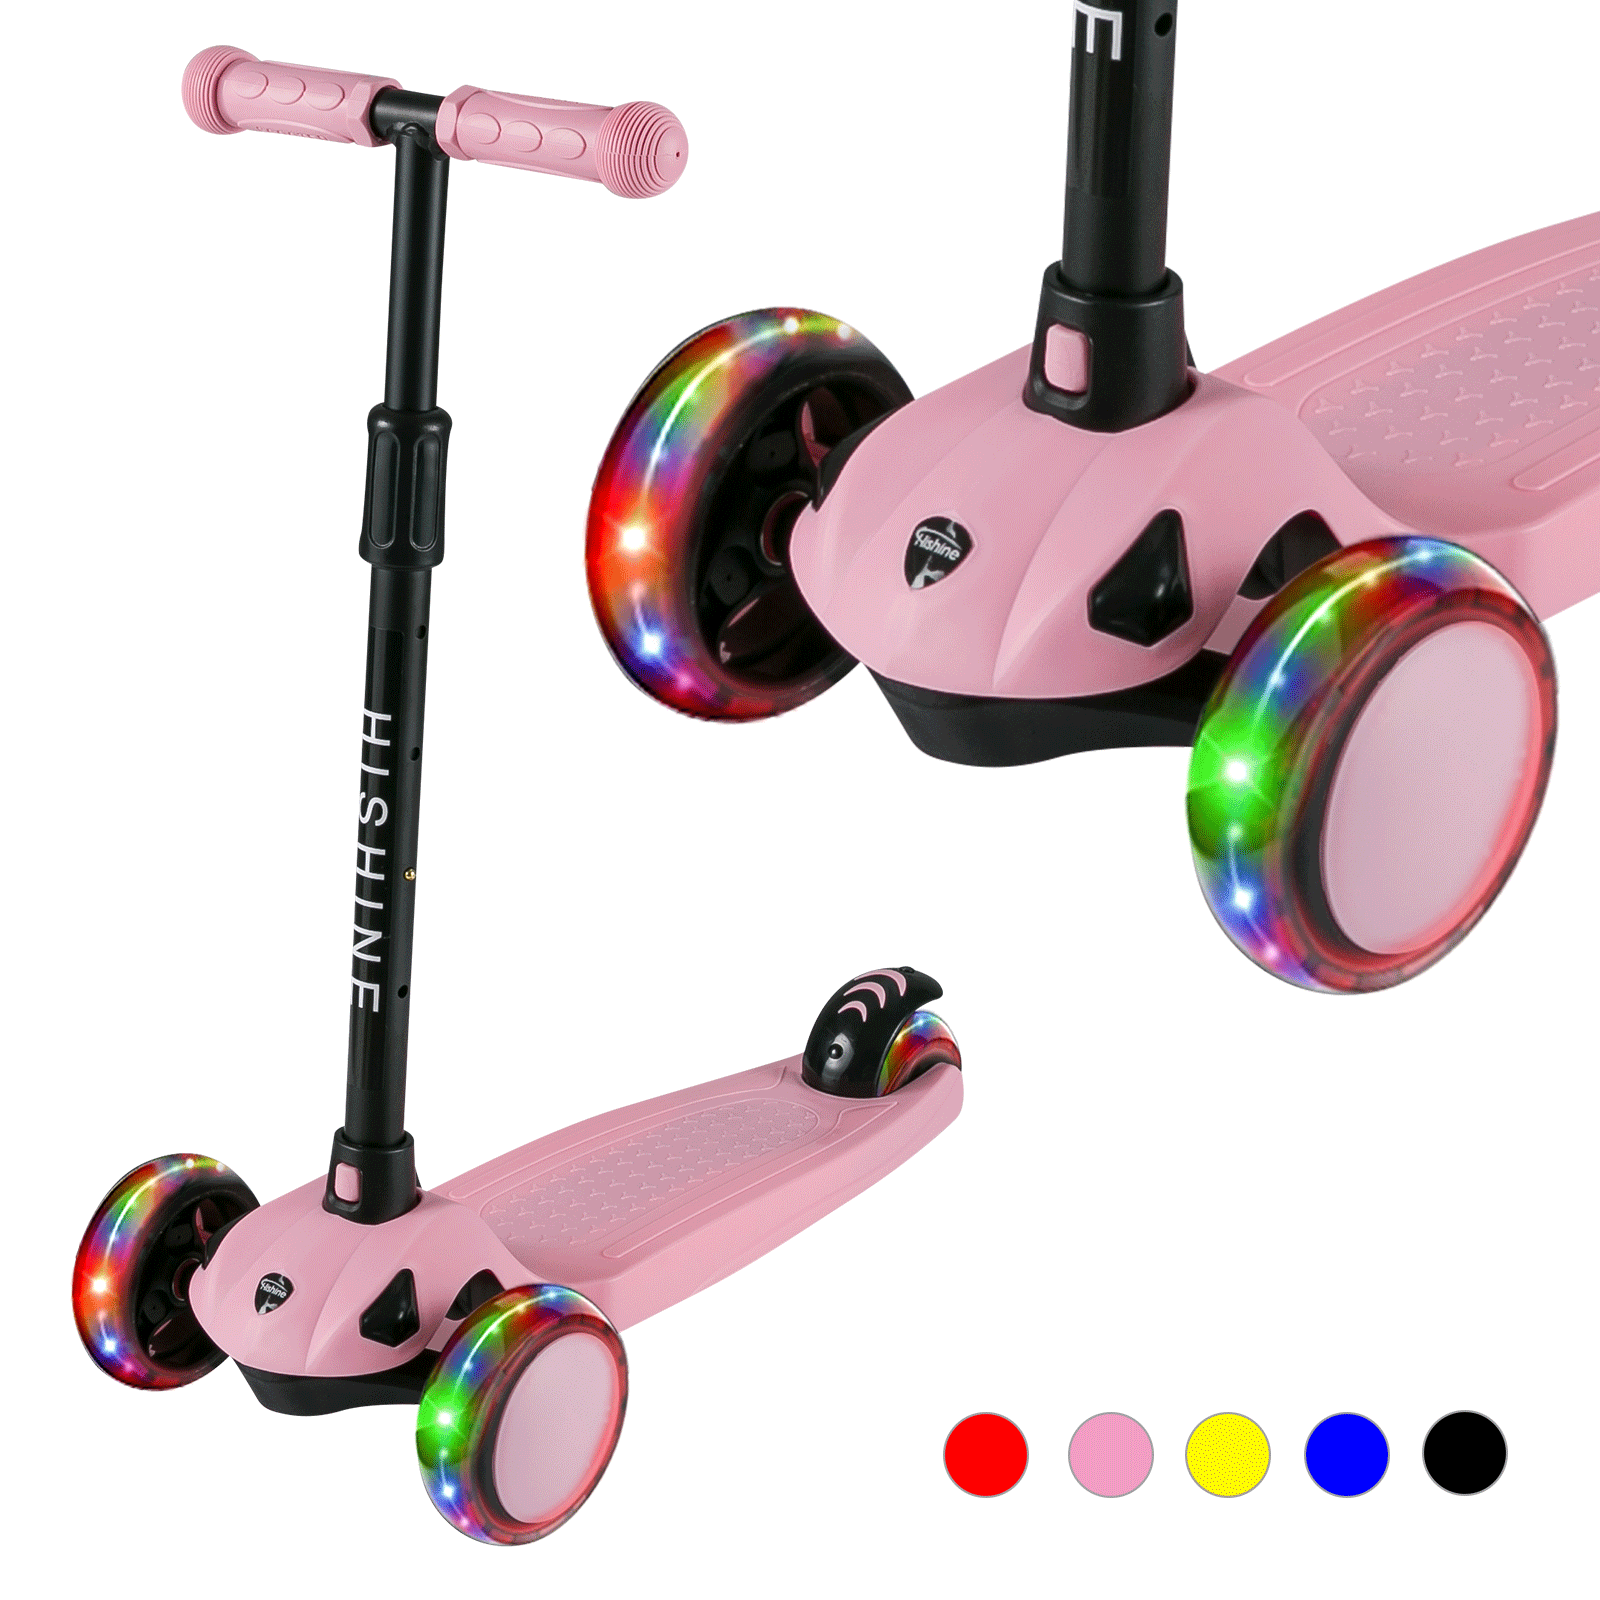 4 Adjustable Height Lean to Steer with LED Light Up Wheels for Children from 3 to 12 Years Old VOKUL Kick Scooter for Kids 3 Wheel Scooter for Toddlers Girls & Boys 